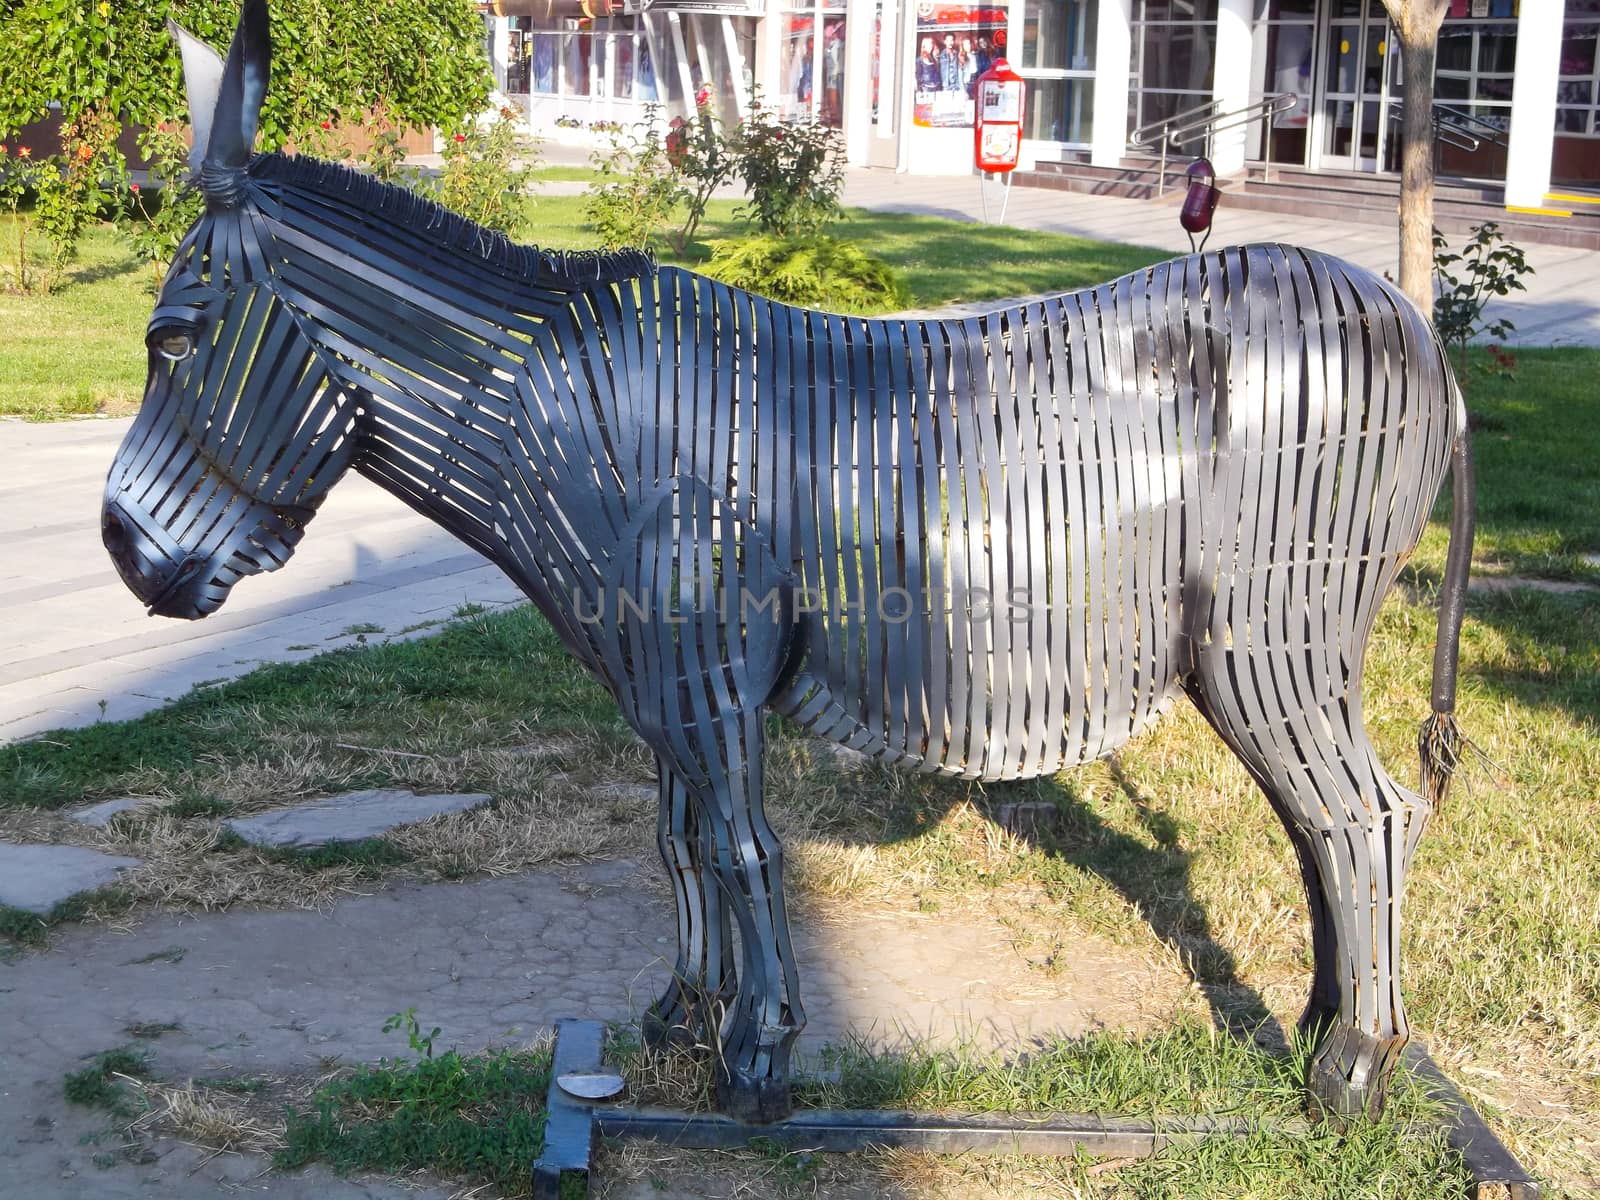 sculpture of a donkey made of metal presented in the open air